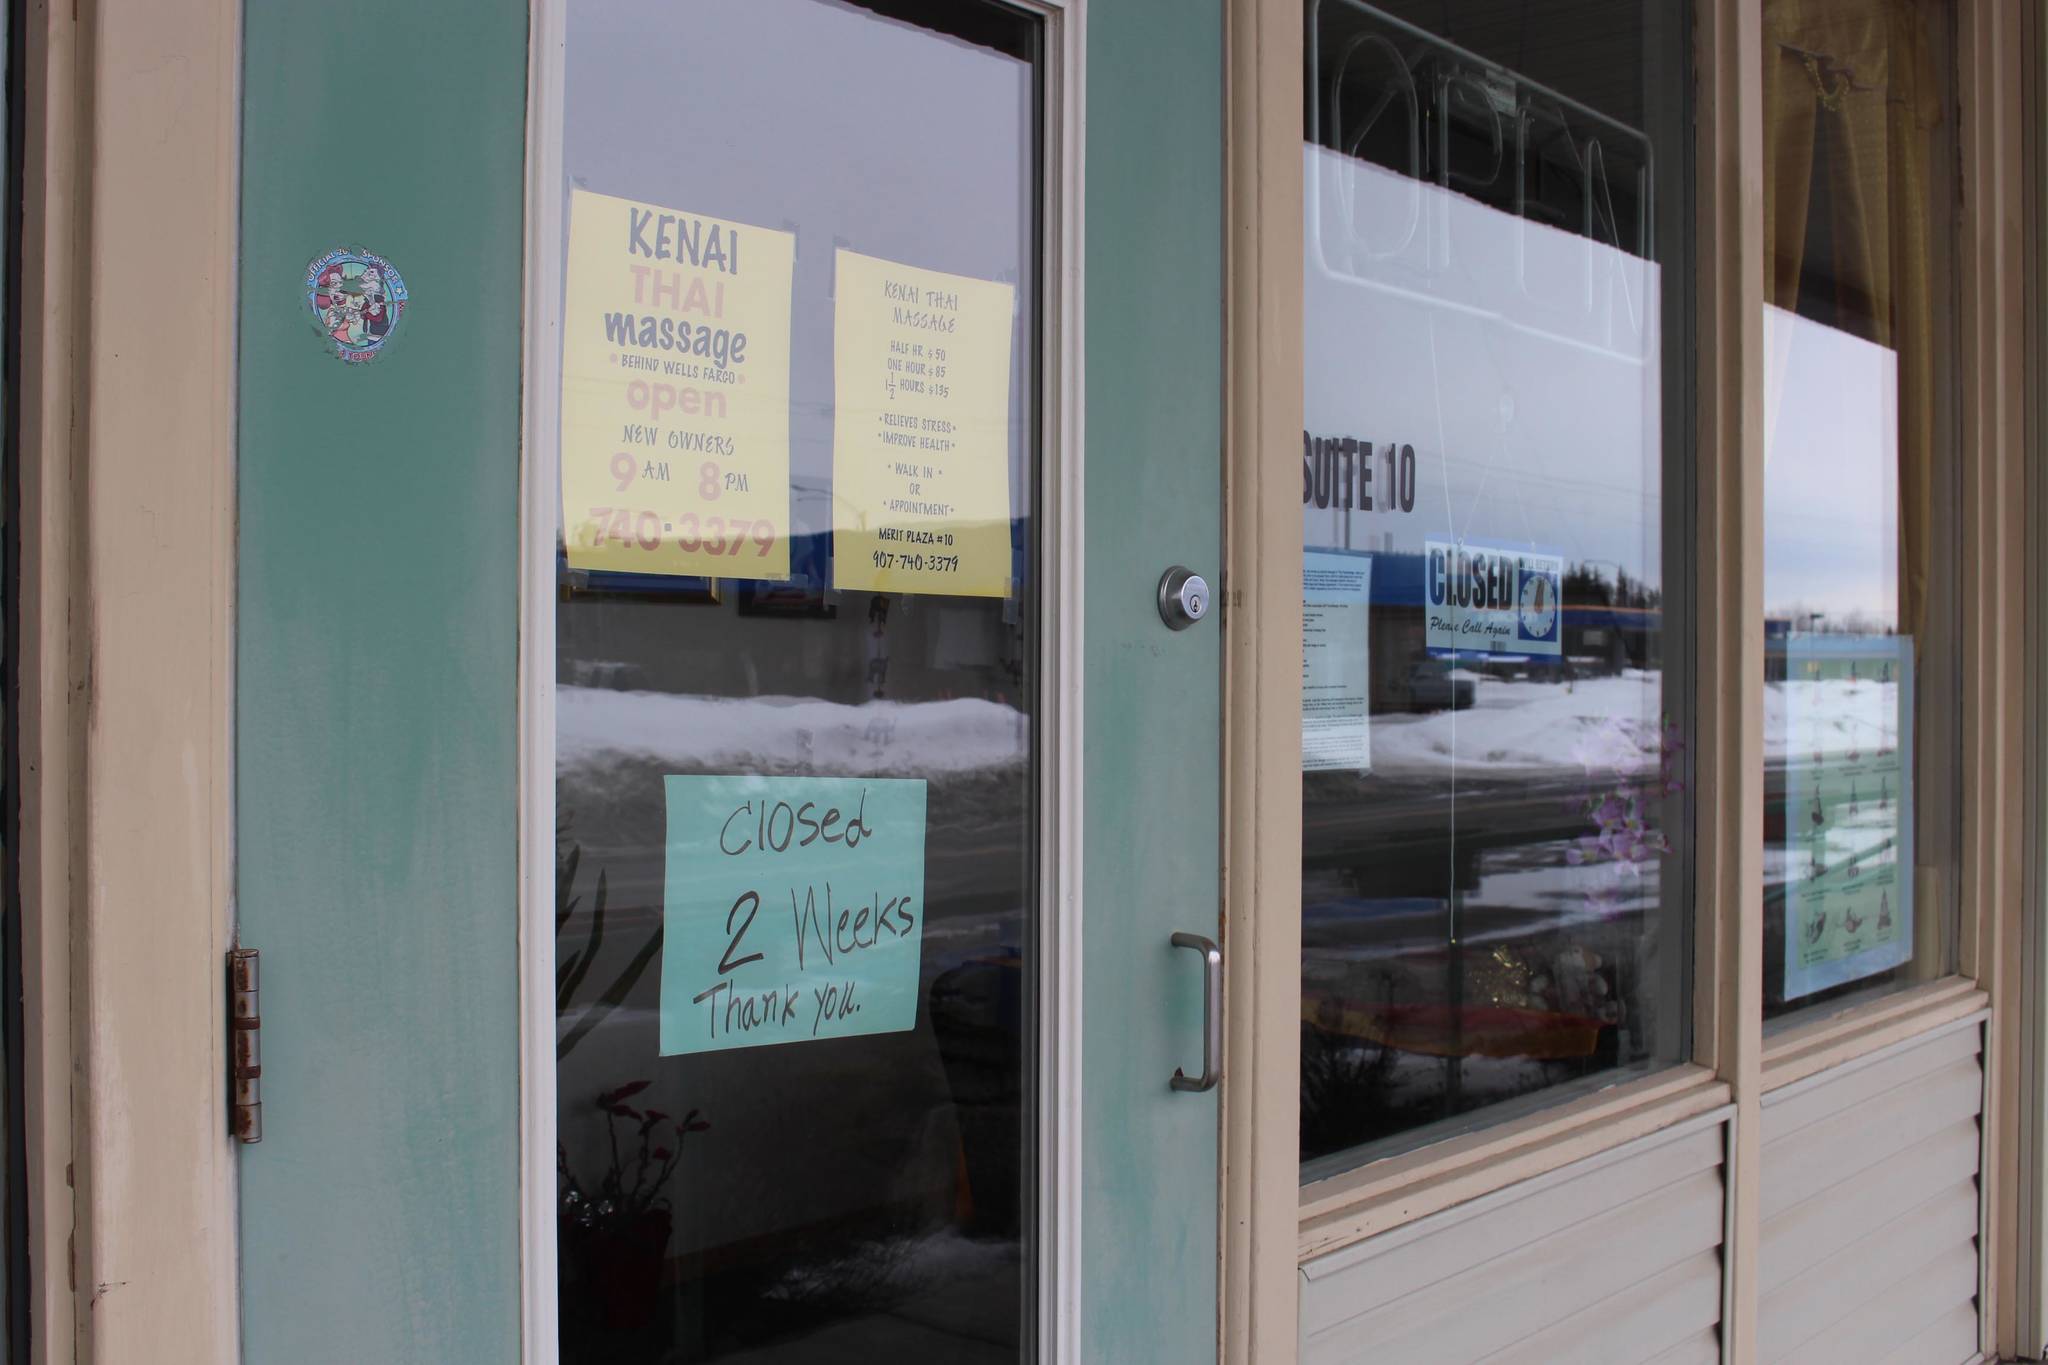 A sign outside of Kenai Thai Massage indicating that they are closed for two weeks can be seen here in Kenai, Alaska, on March 25, 2020. (Photo by Brian Mazurek/Peninsula Clarion)